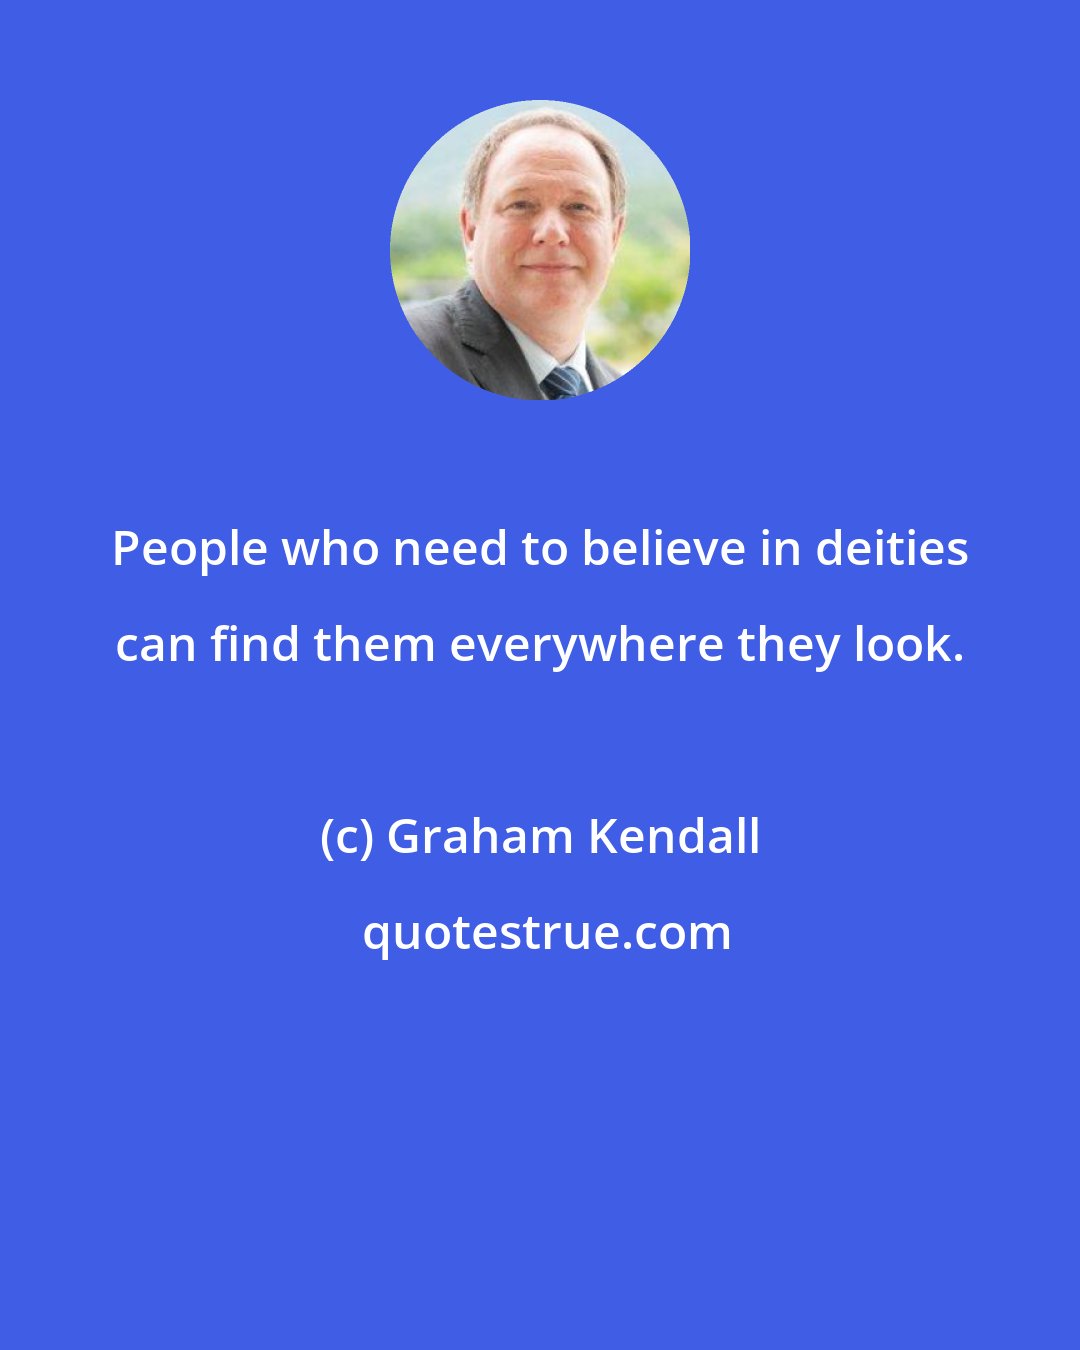 Graham Kendall: People who need to believe in deities can find them everywhere they look.